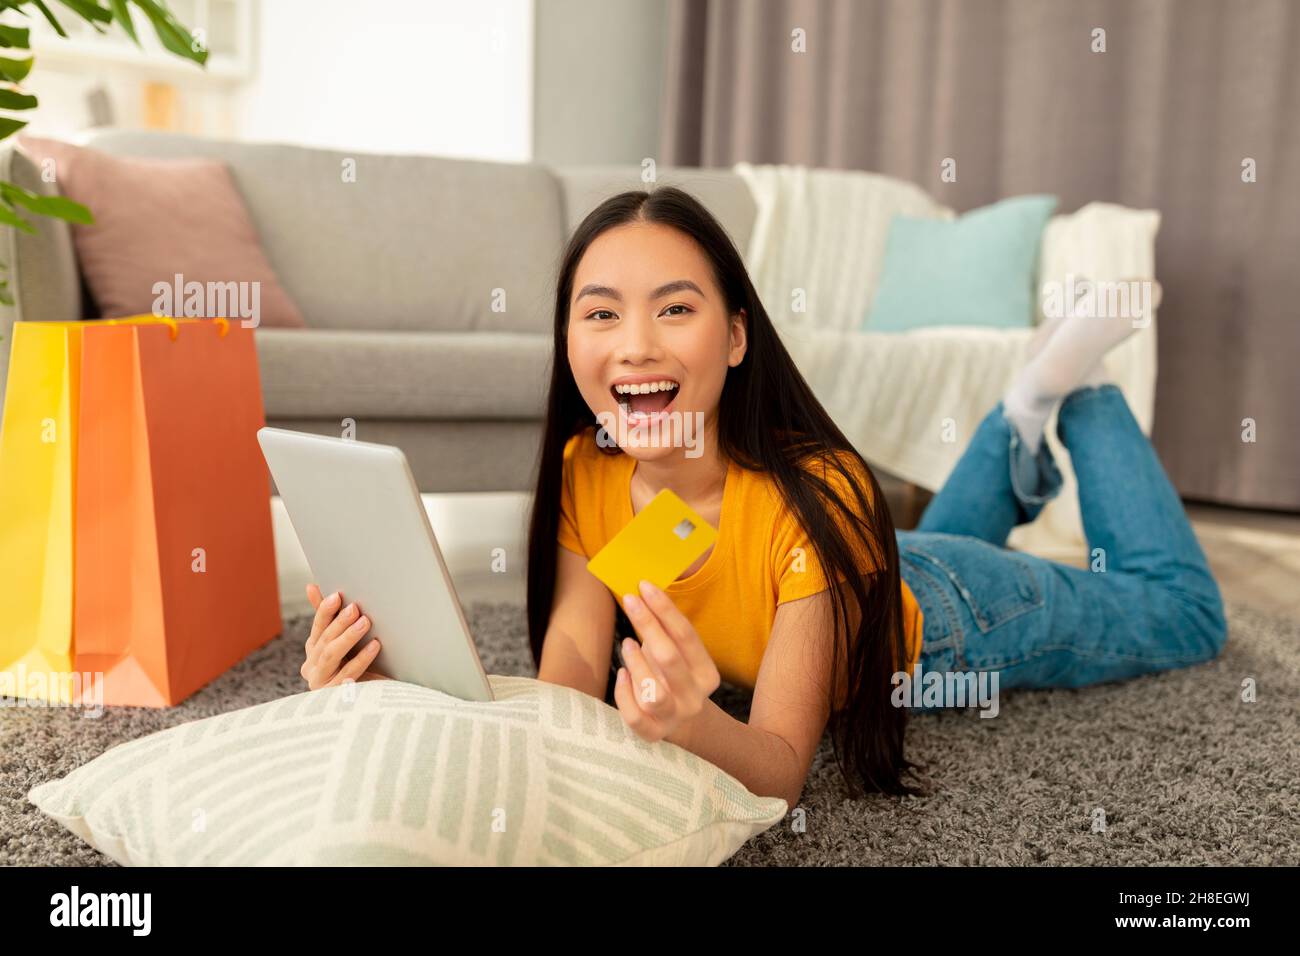 Online sales and discounts. Surprised asian lady lying on floor with tablet and credit card, emotionally reacting sale Stock Photo